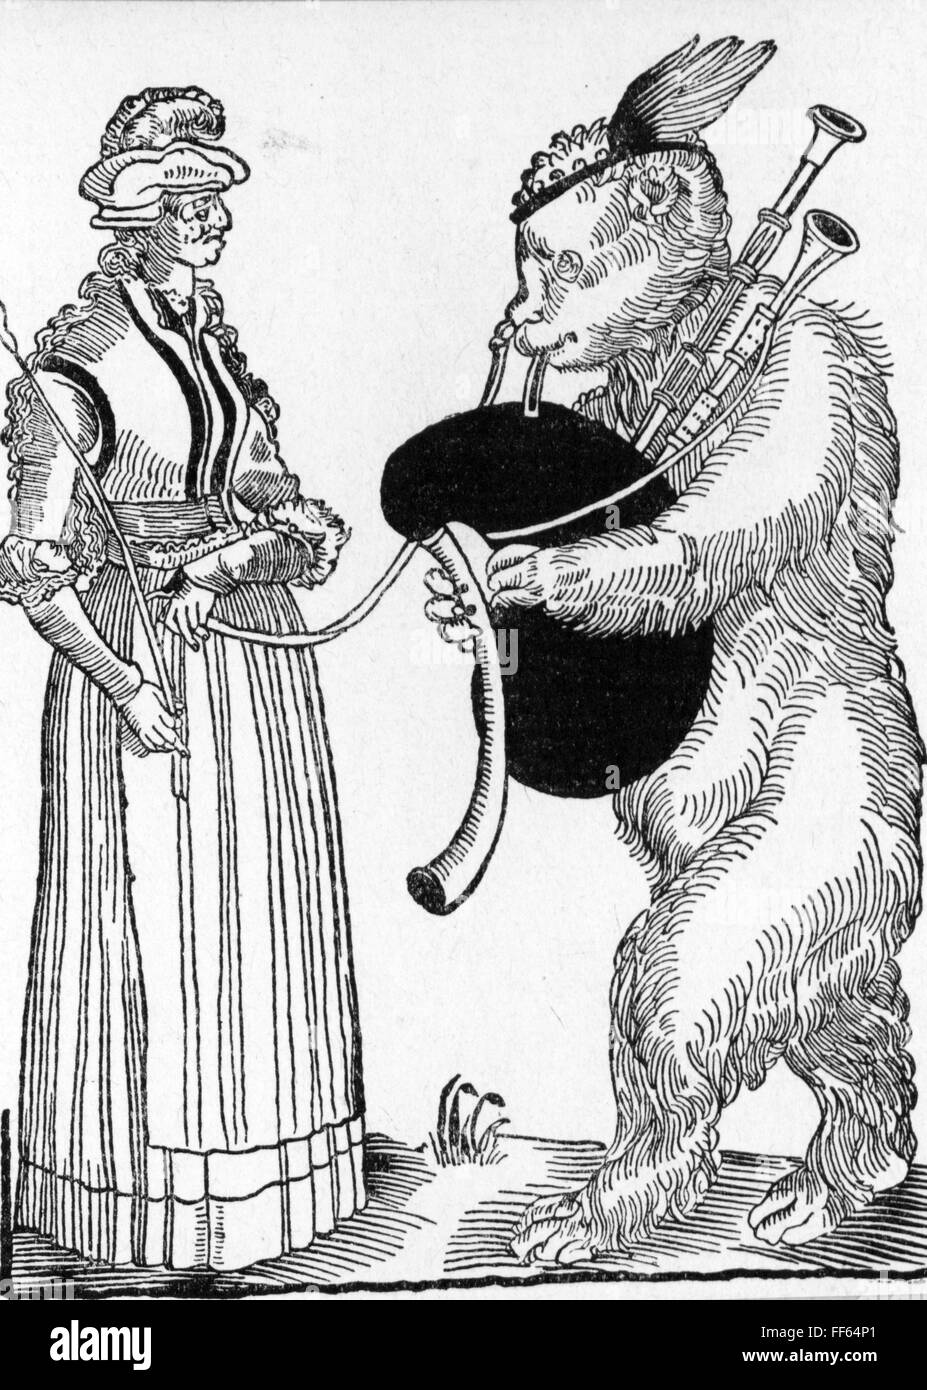 circus,dressage,bear leader and bear with bagpipes,woodcut,Augsburg,16th century,musician,musicians,bagpiper,piper,bagpipers,pipers,bagpipe,musical instrument,musical instruments,wind instruments,wind instrument,woodwind instrument,woodwind instruments,aerophone,make music,play music,making music,playing music,makes music,plays music,made music,played music,playing,play,fashion,clothes,dress,dresses,hat,hats,headpiece,headpieces,animals,animal,Germany,people,woman,women,female,circus,circuses,bear,bears,pipes,pl,Additional-Rights-Clearences-Not Available Stock Photo